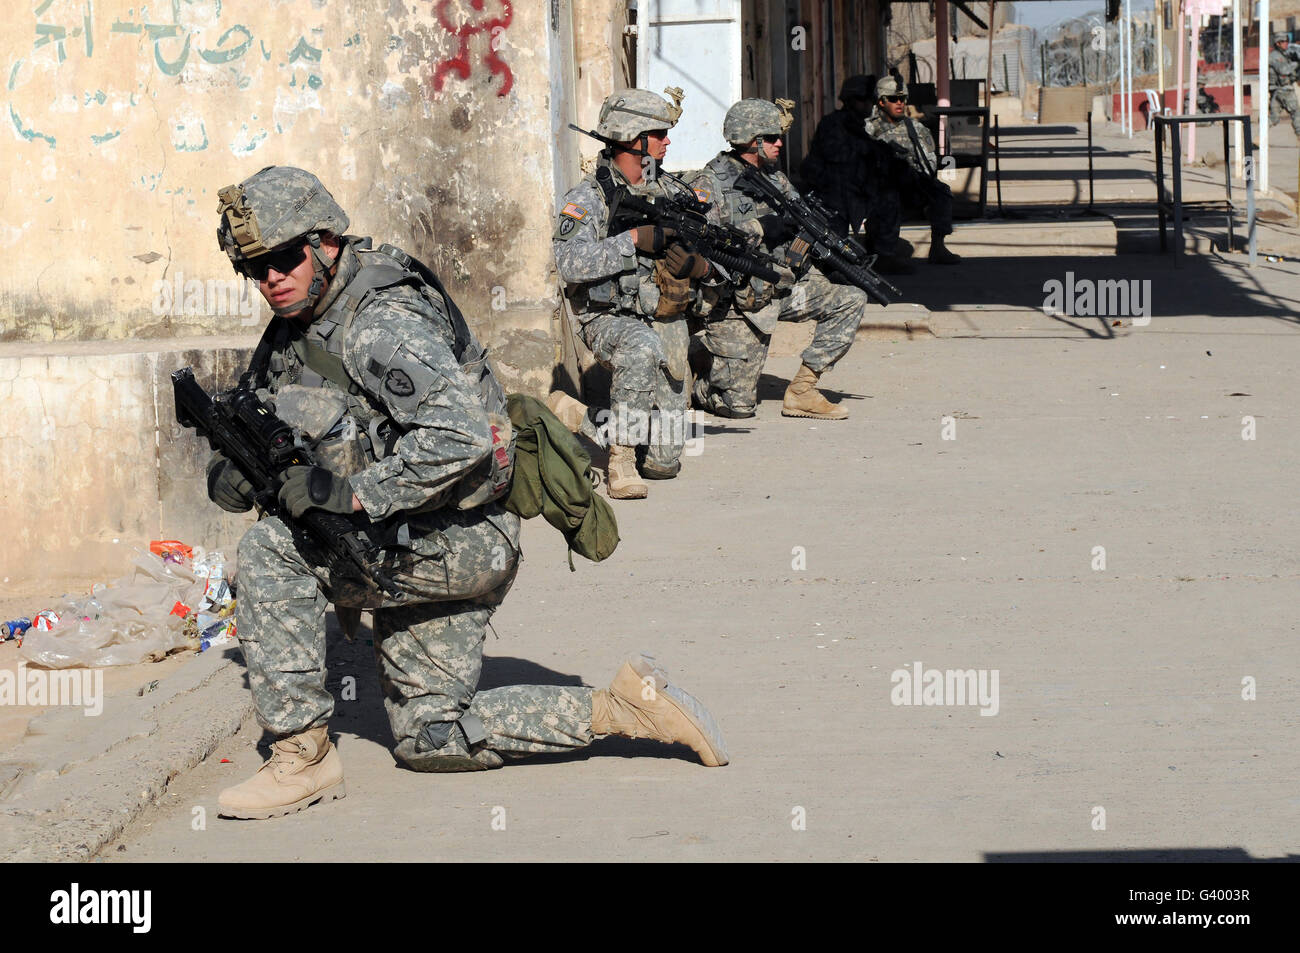 U.S. Army soldiers providing security during a patrol in Siniyah, Iraq. Stock Photo